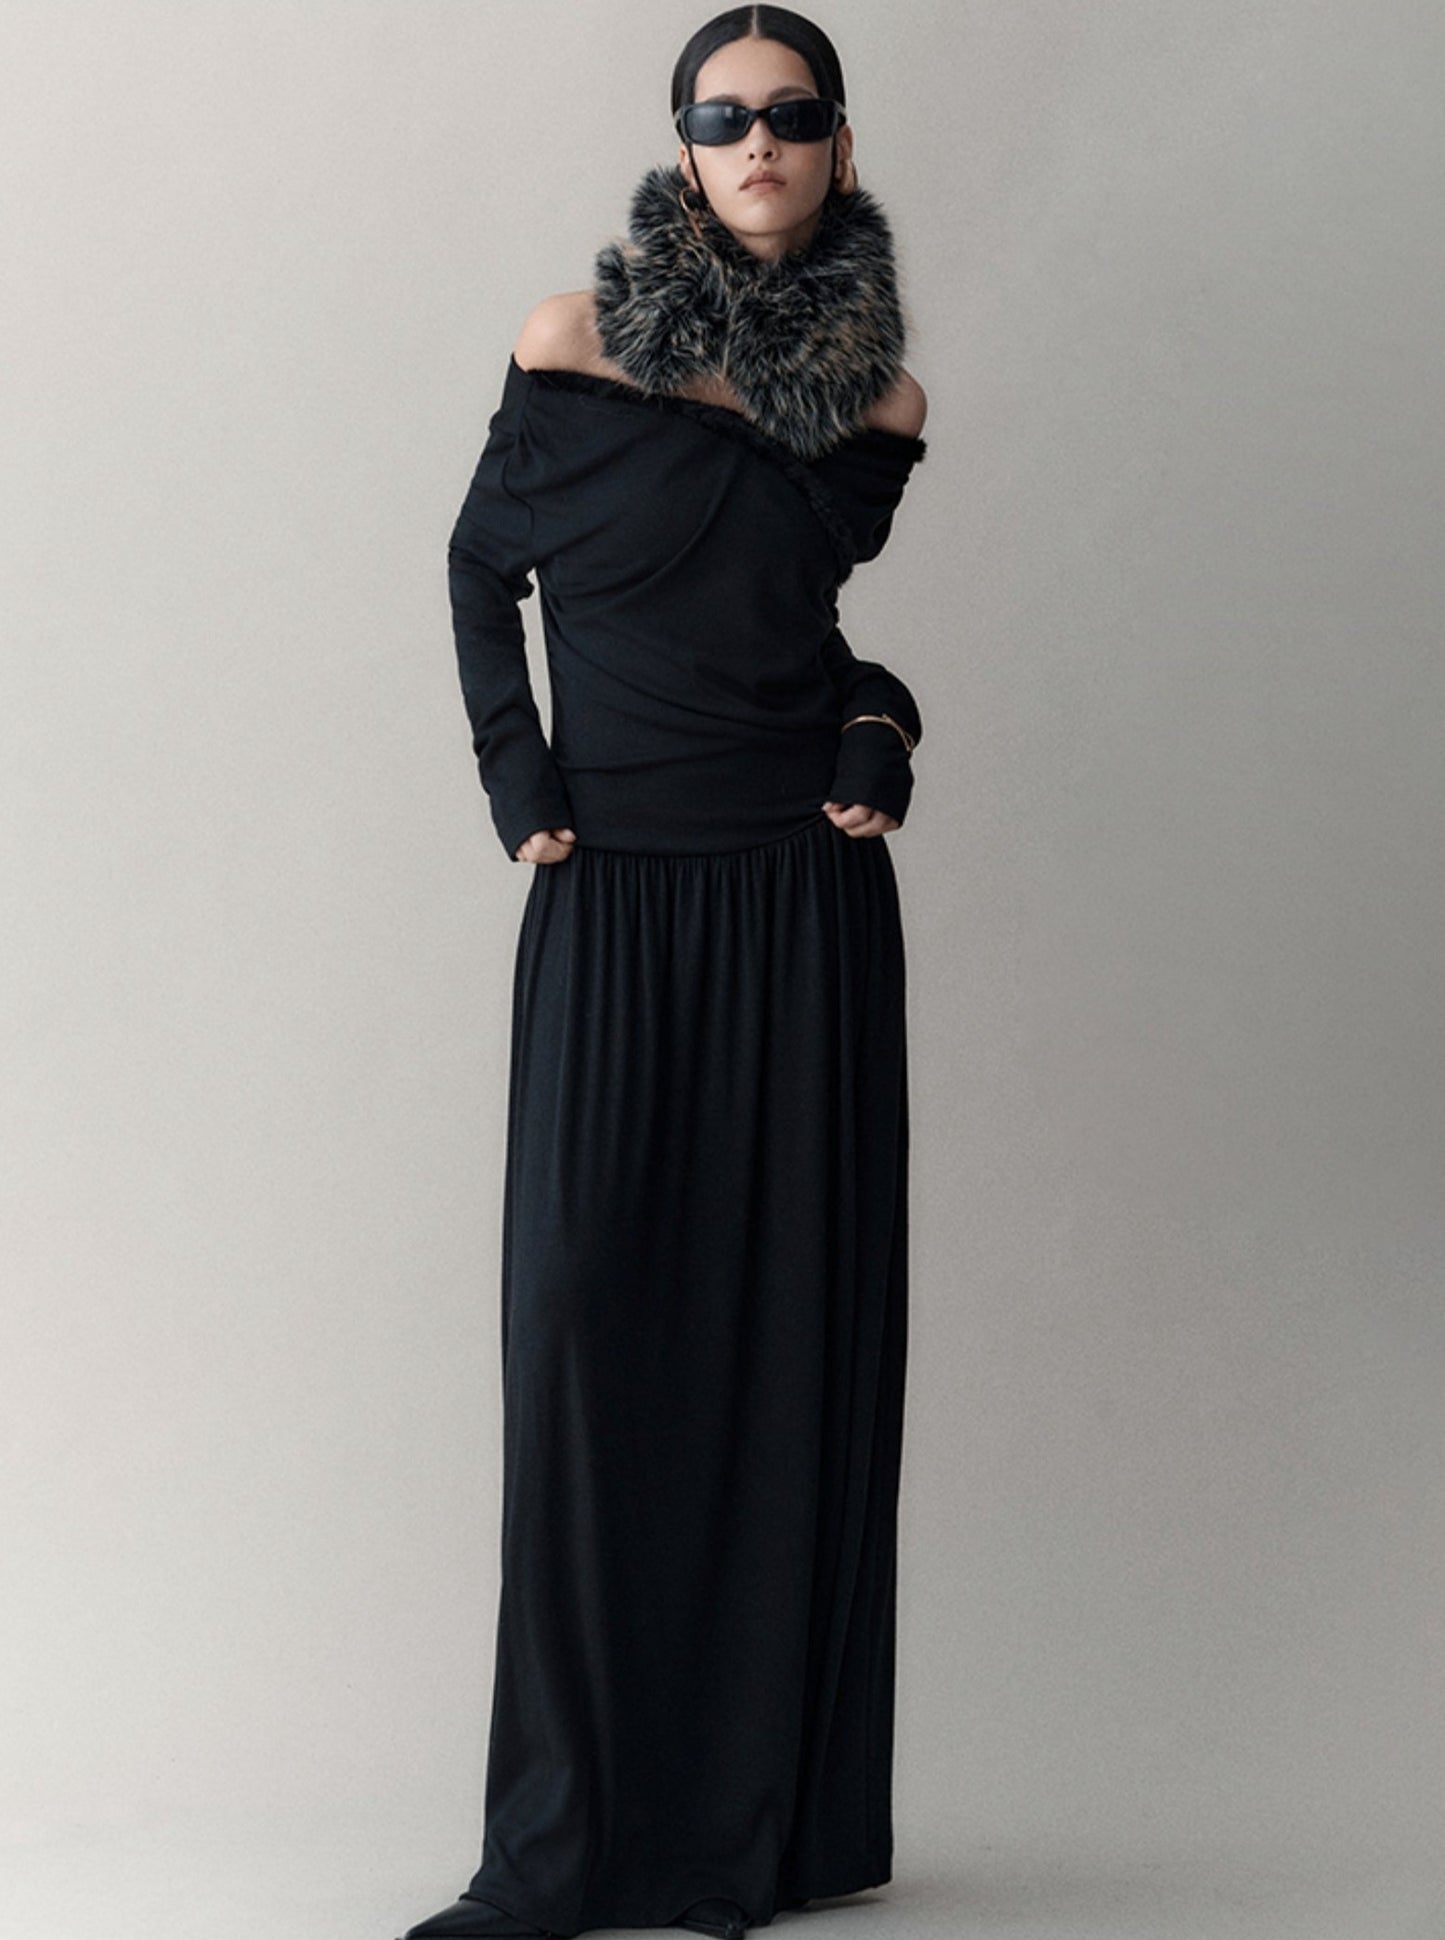 Structured V-neck pleated maxi dress